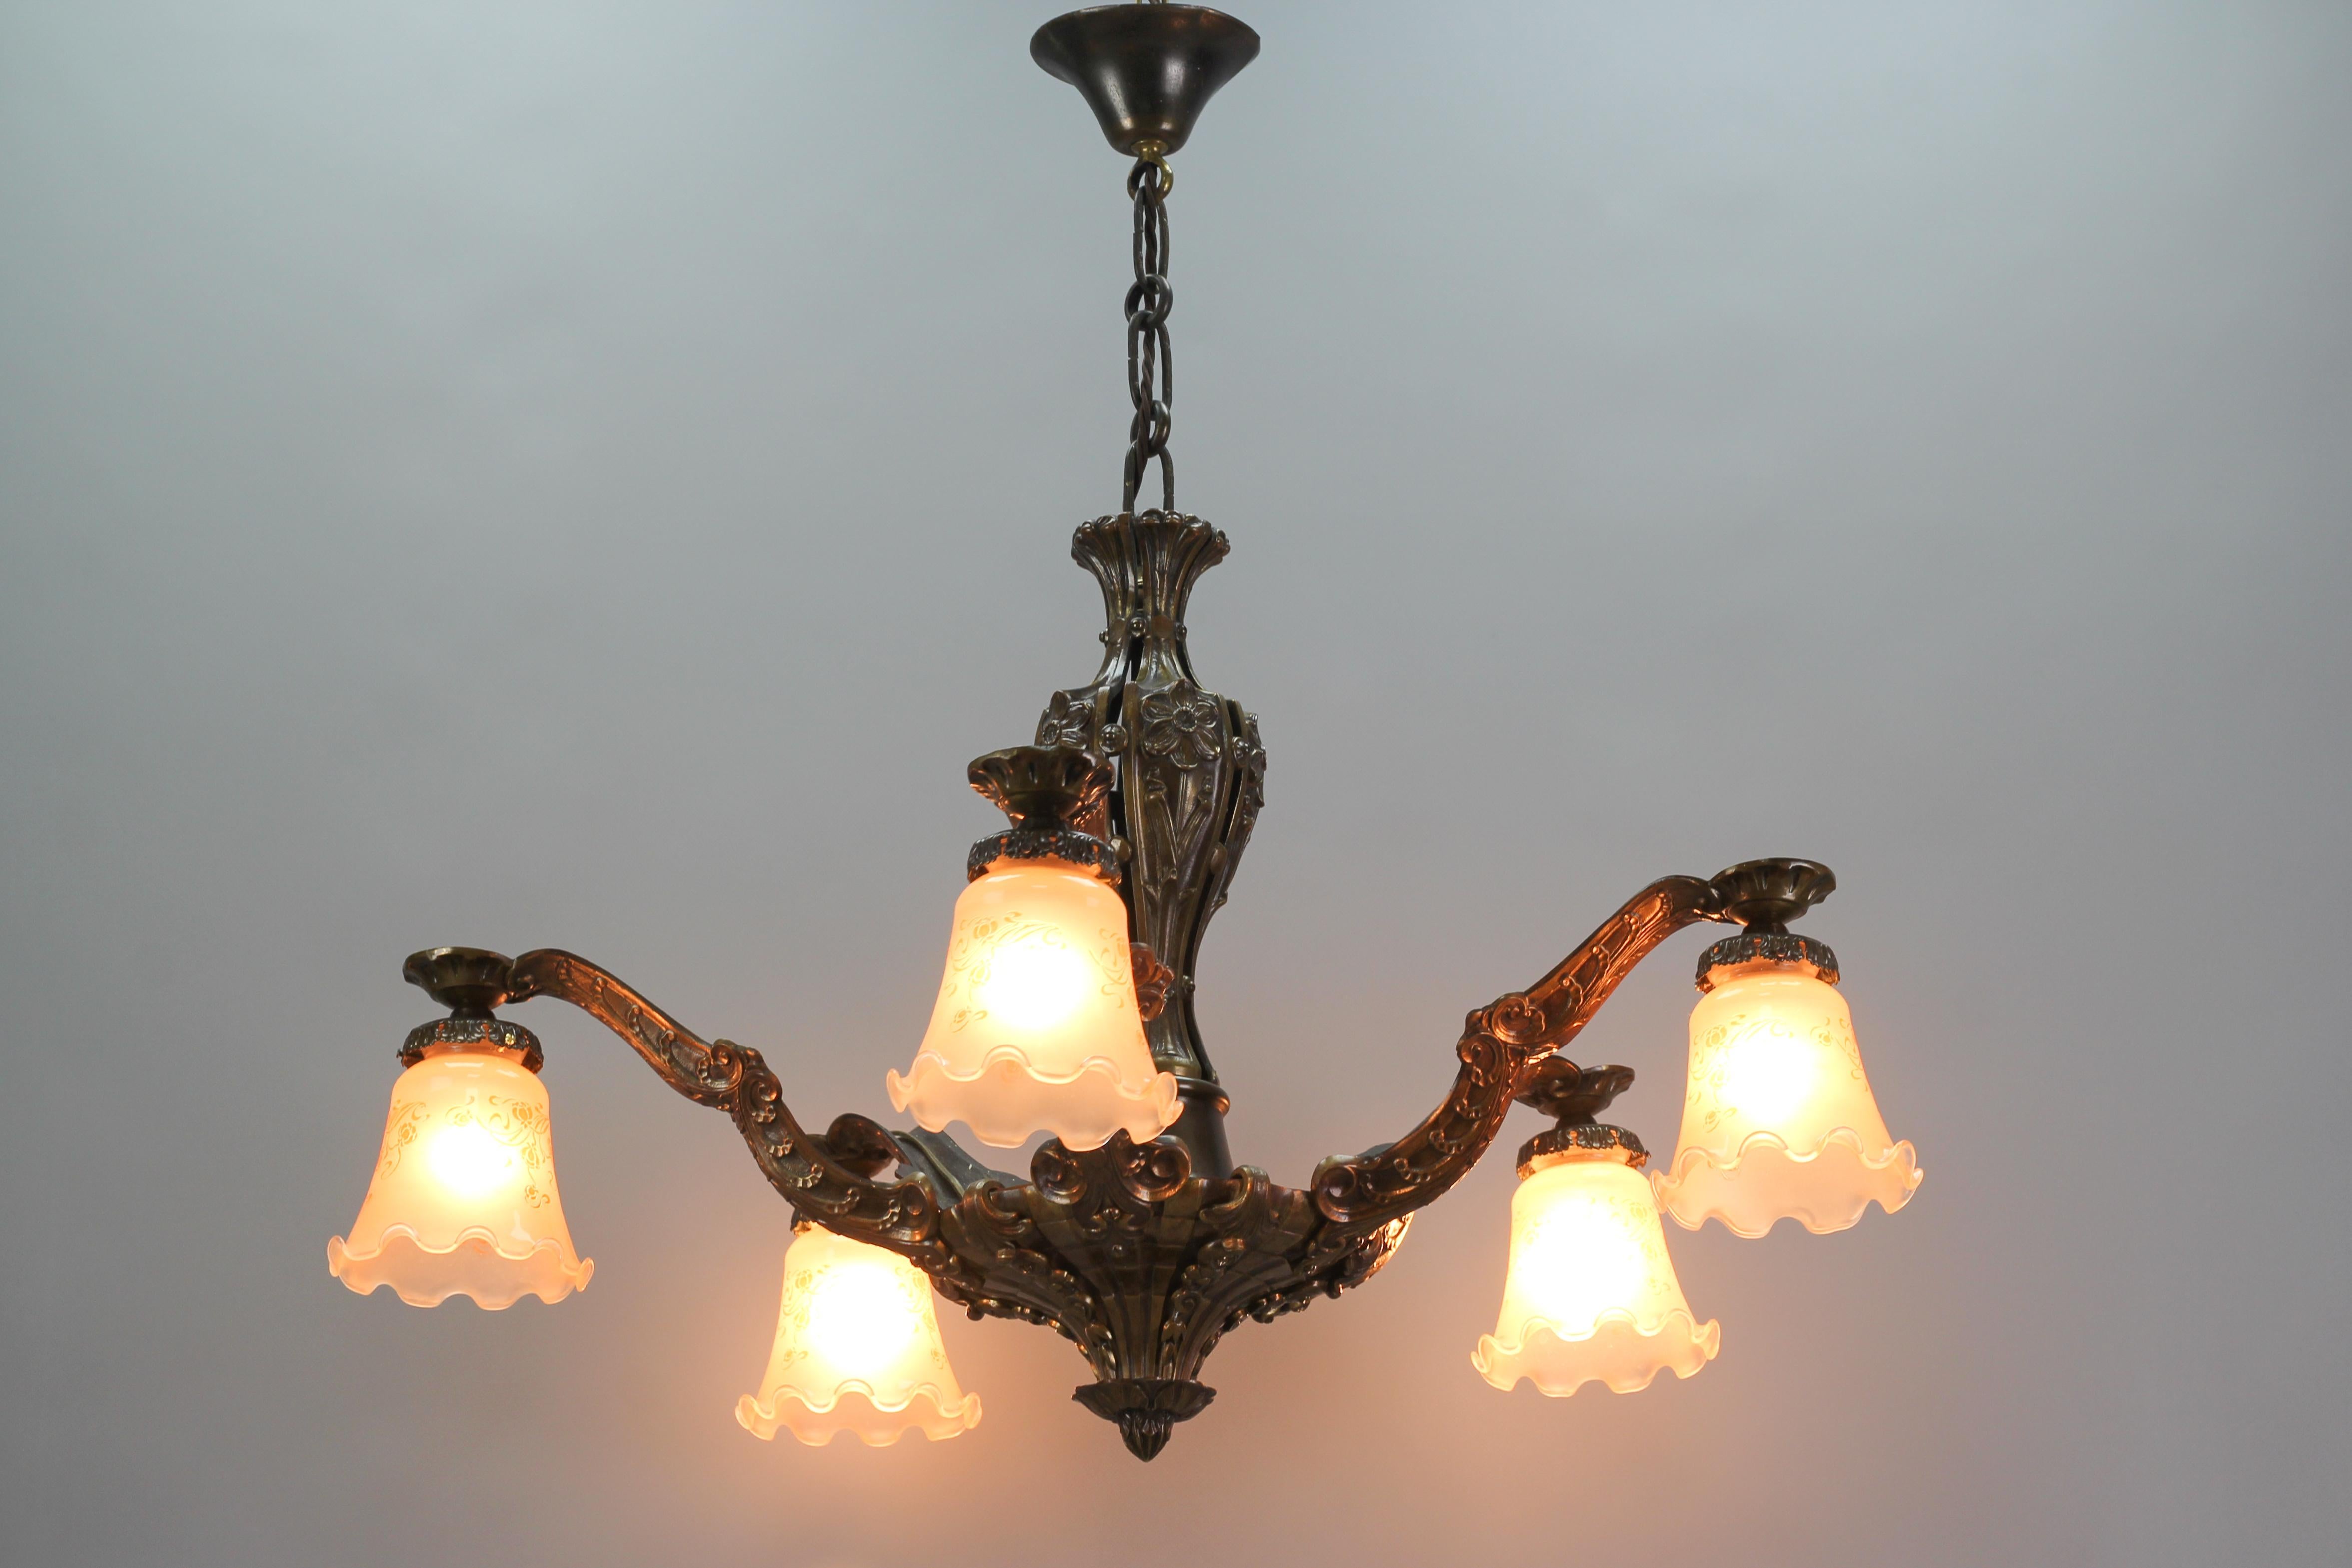 Beautiful French Art Nouveau bronze chandelier from the 1920s. Five bronze arms decorated with flowers and ornaments, each with a tangerine color glass lampshade with floral motifs. The glass lampshades could be from circa the 1950s.
Five sockets